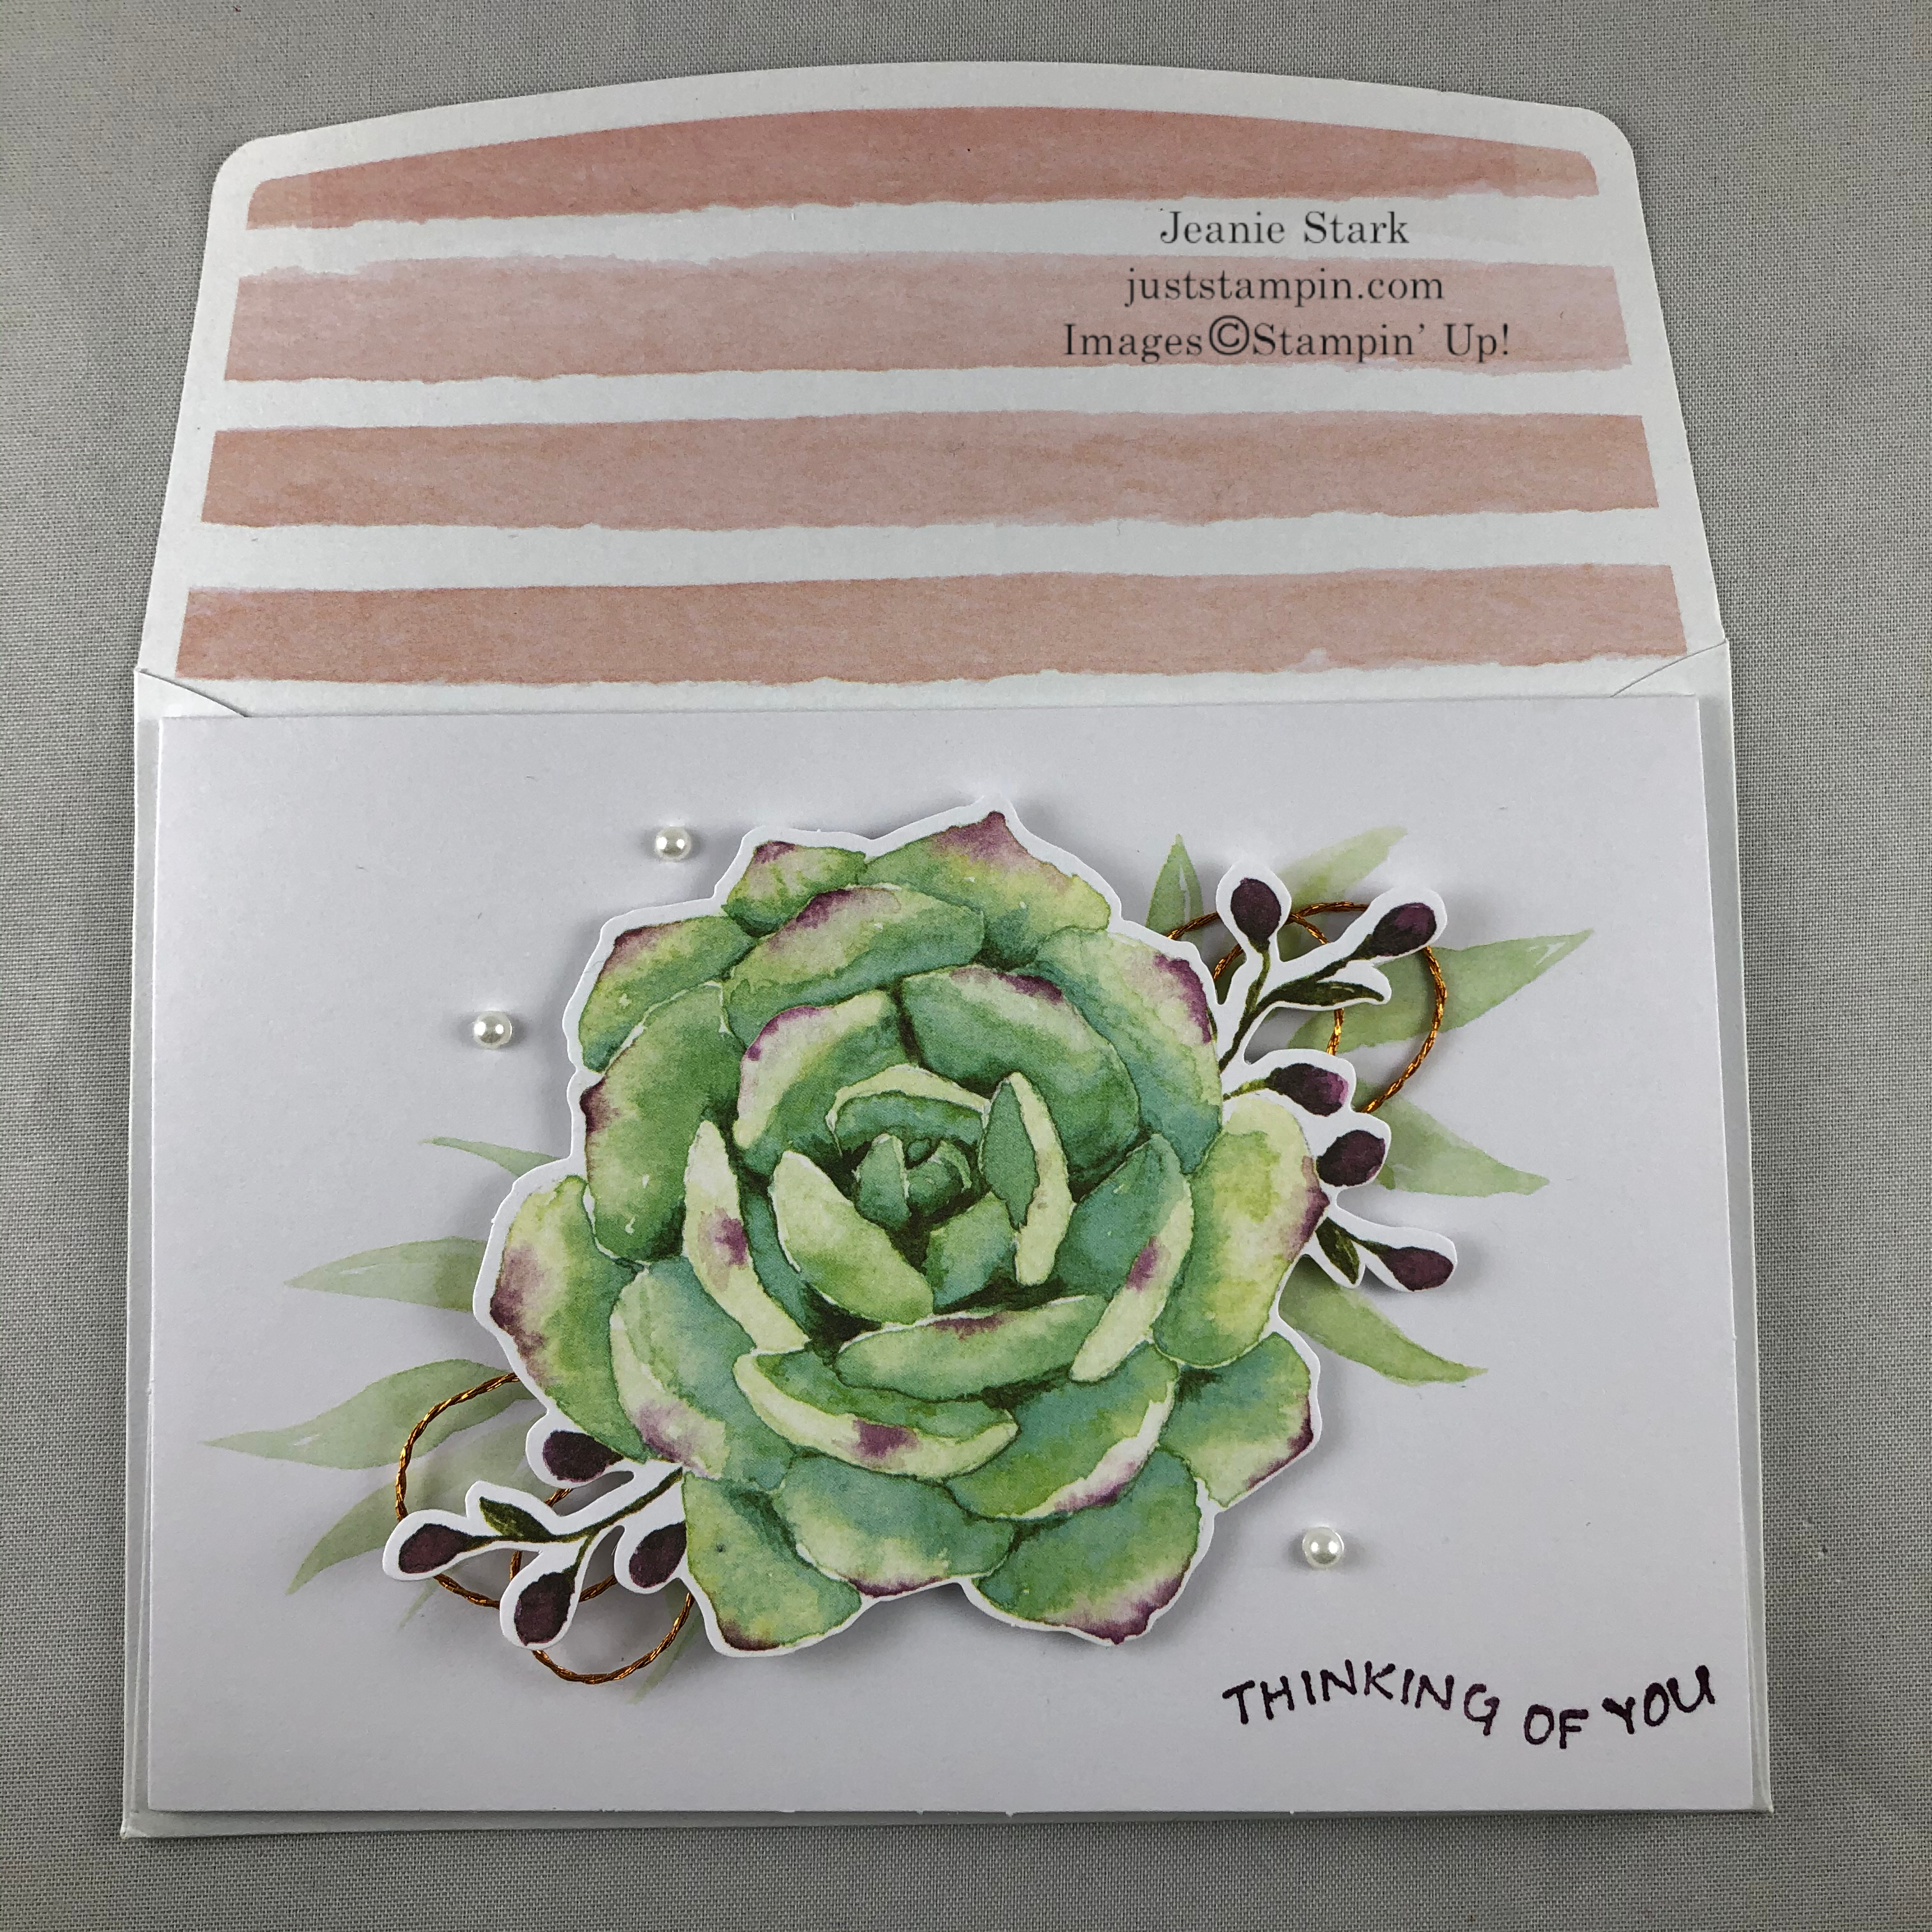 Stampinn' Up! Notes of Kindness kit alternative idea for thinking of you card - Jeanie Stark StampinUp